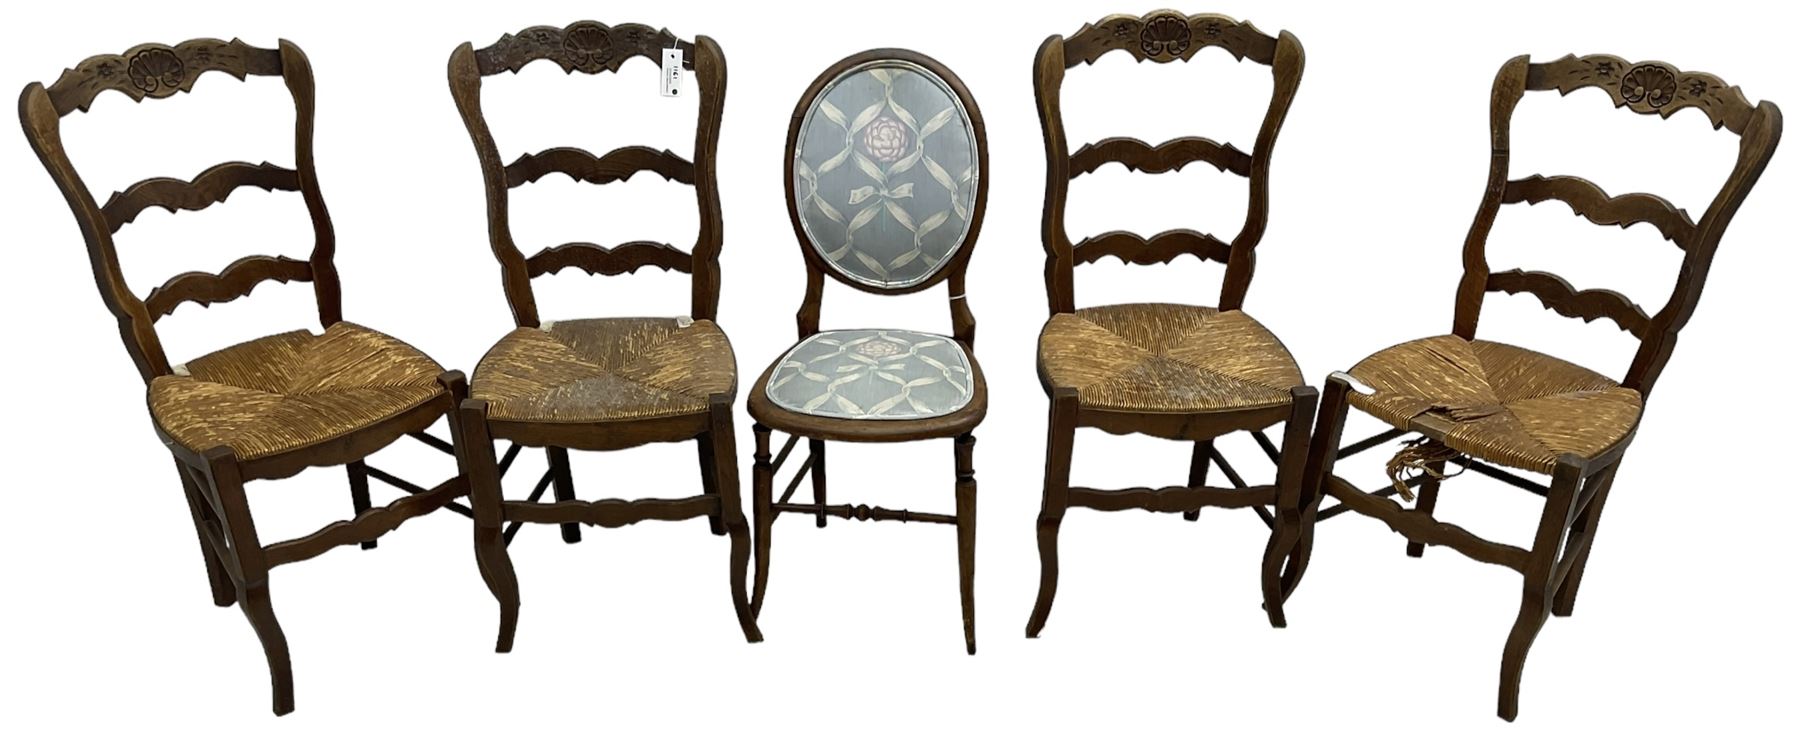 Set of four French hardwood dining chairs - Image 2 of 4